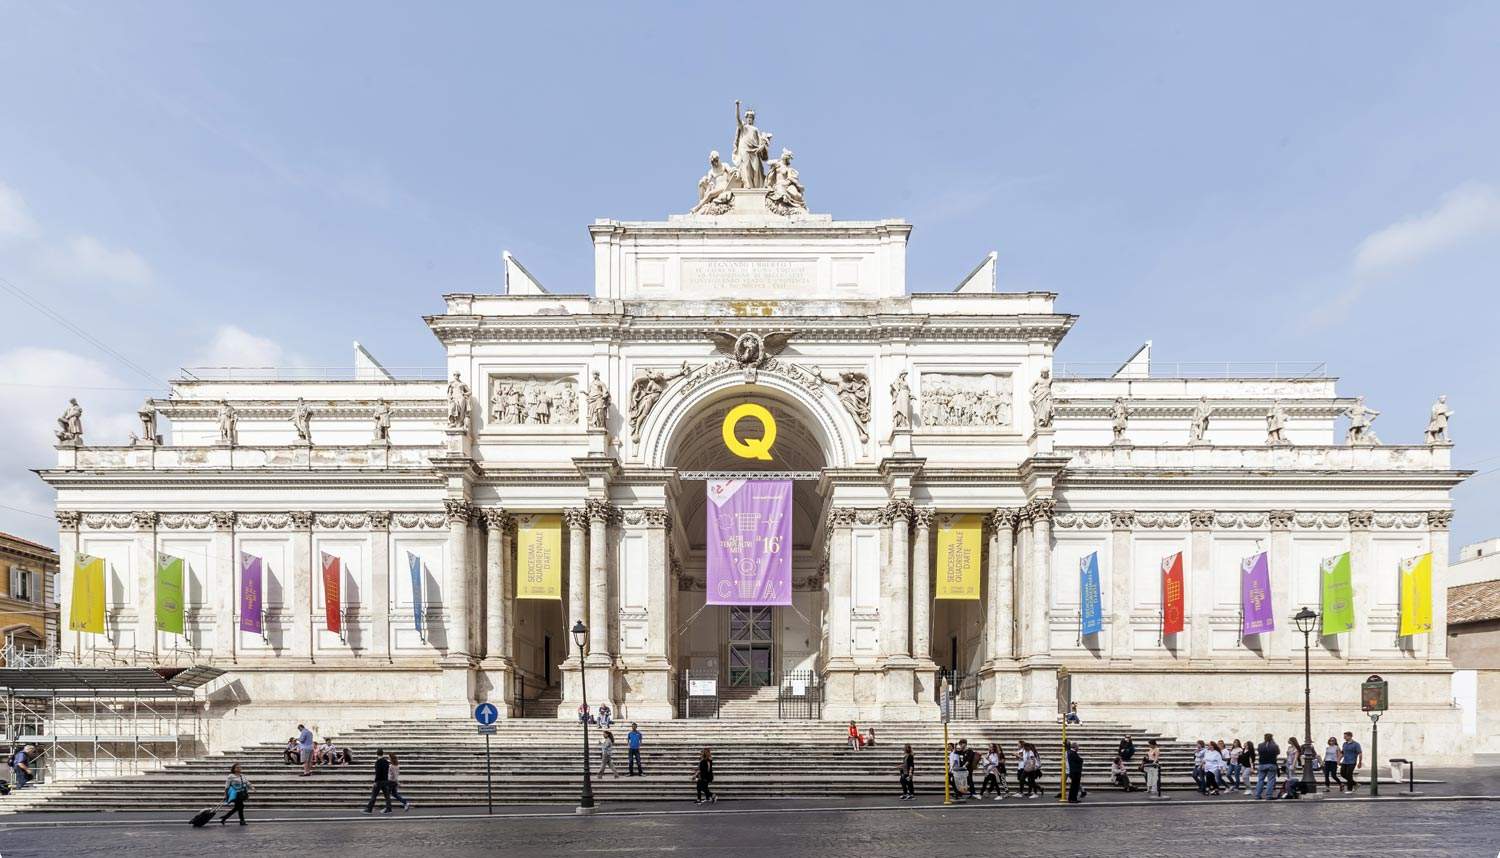 Gucci gives everyone free admission to the Quadriennale in Rome. And the exhibition becomes free